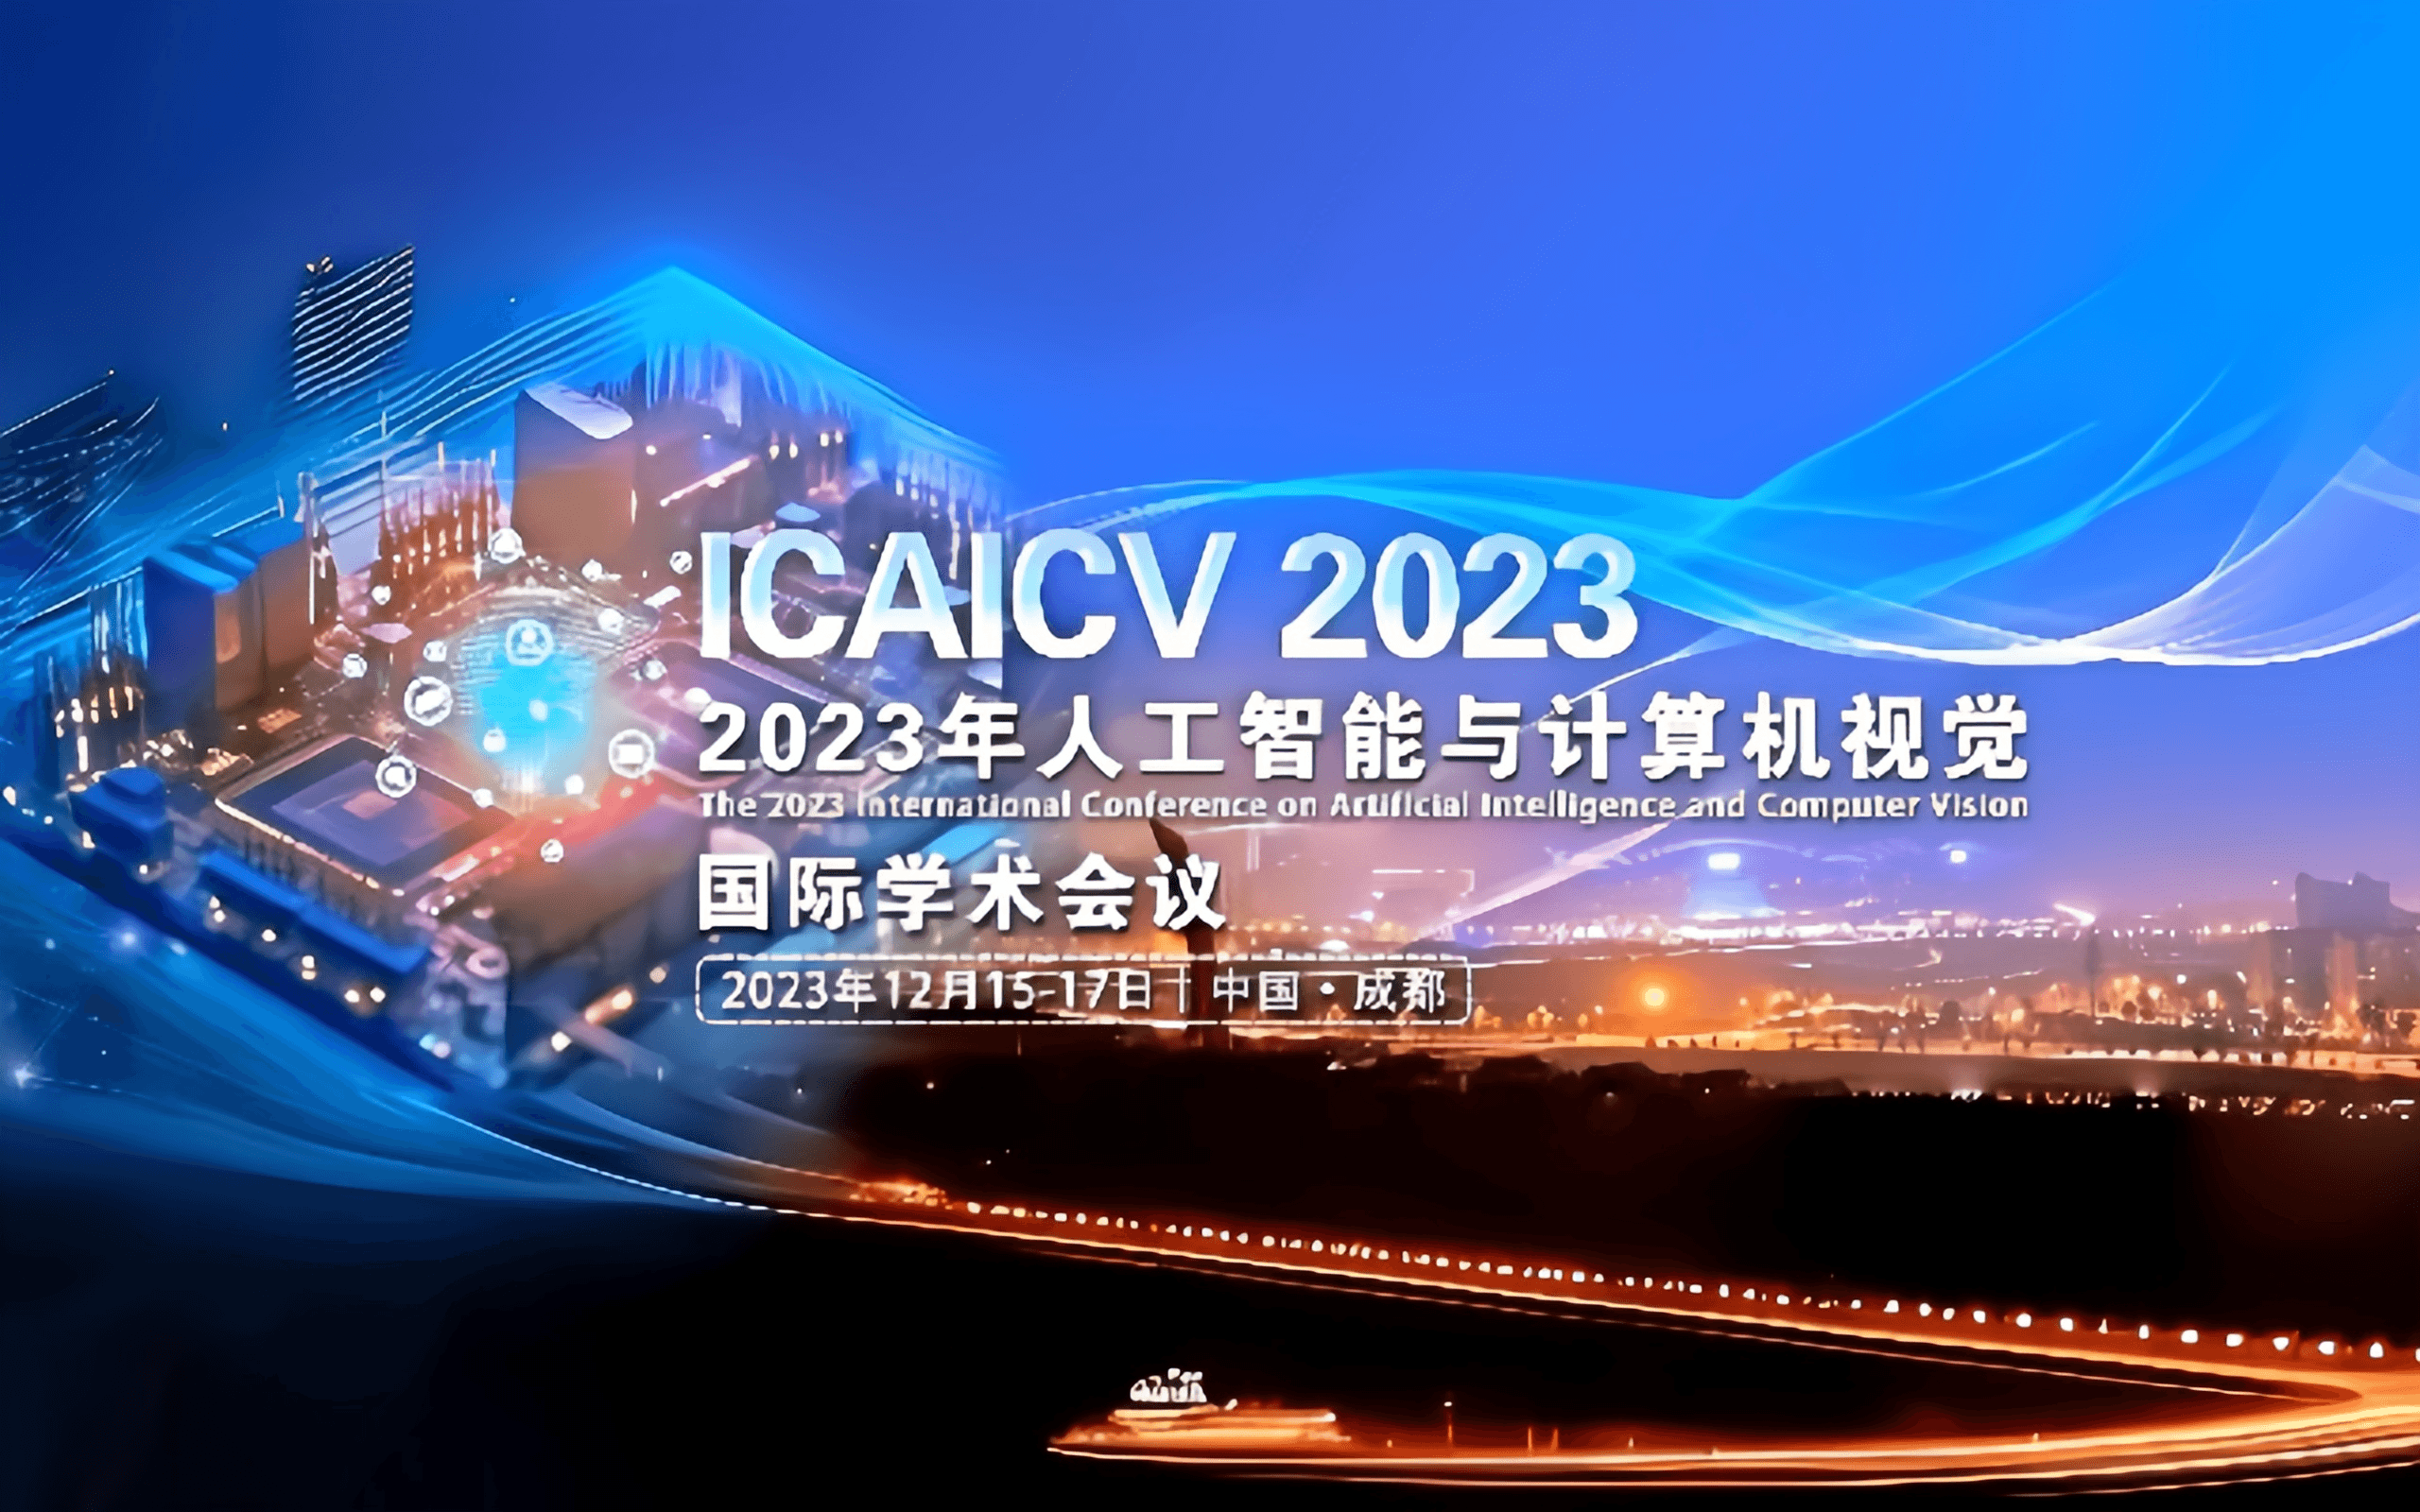 The 2023 International Conference on Artificial Intelligence and Computer Vision